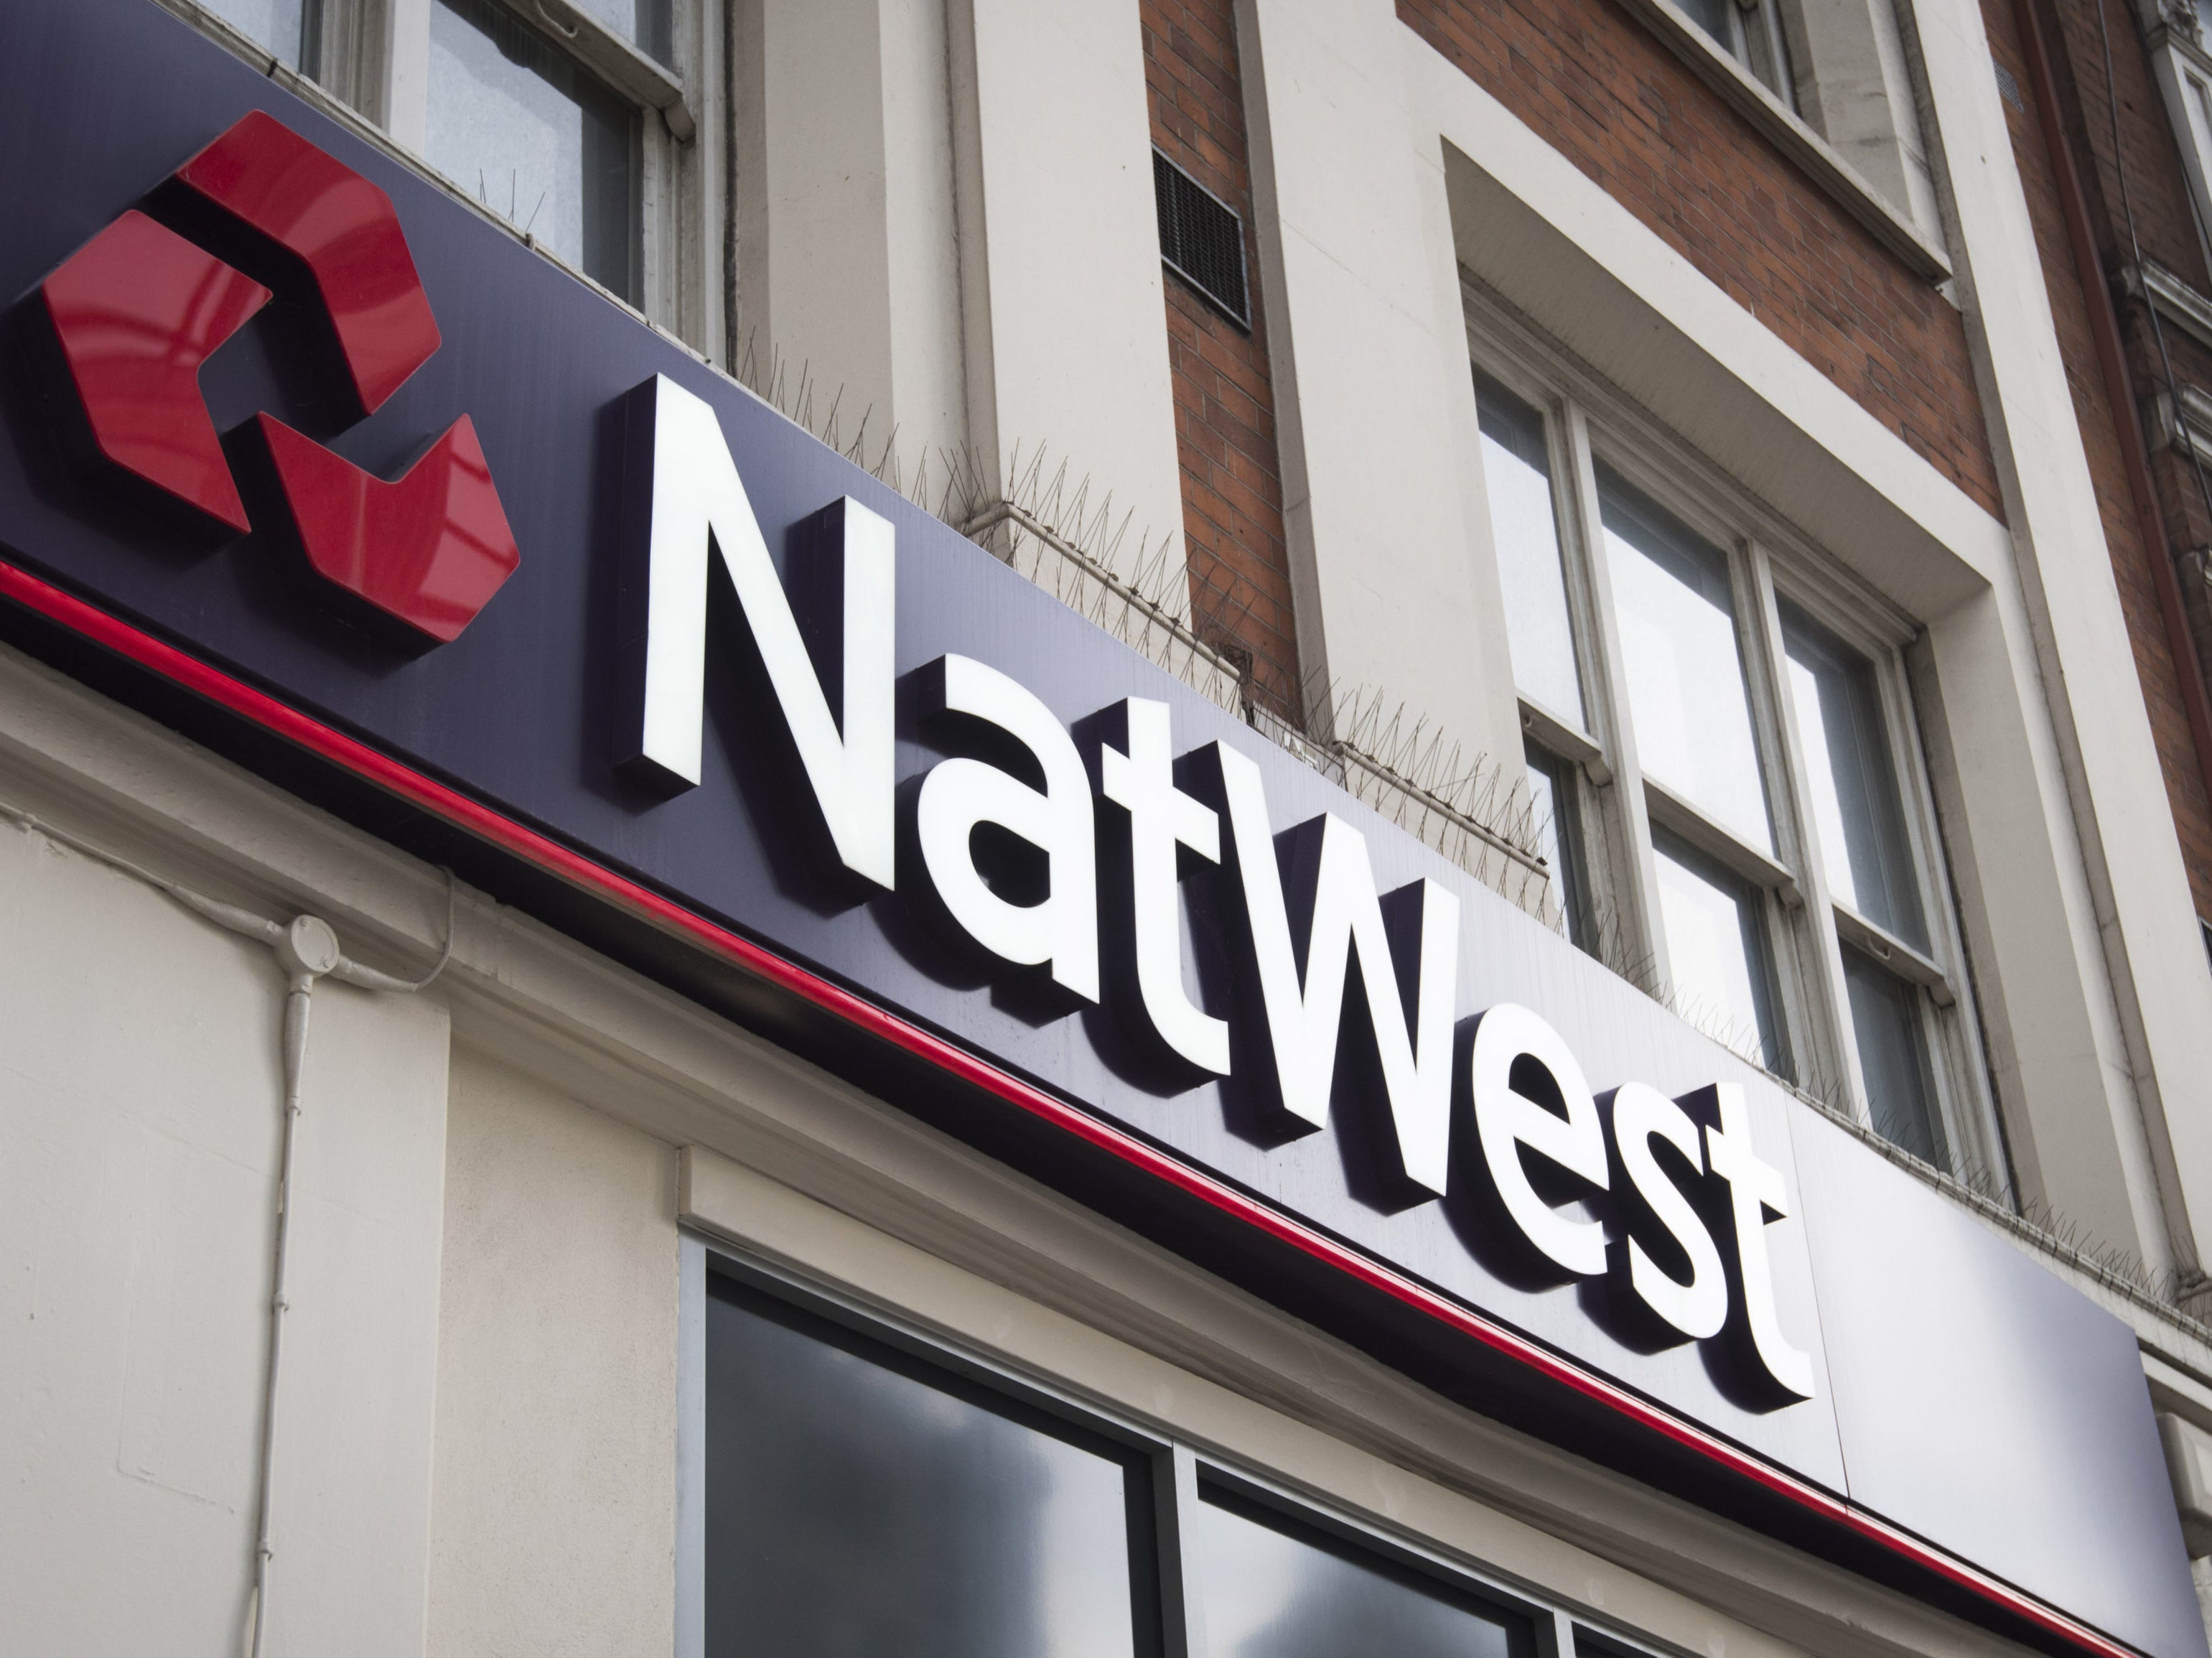 NatWest became the latest bank to beat gloomy expectations as it reported a profit when analysts had predicted a loss